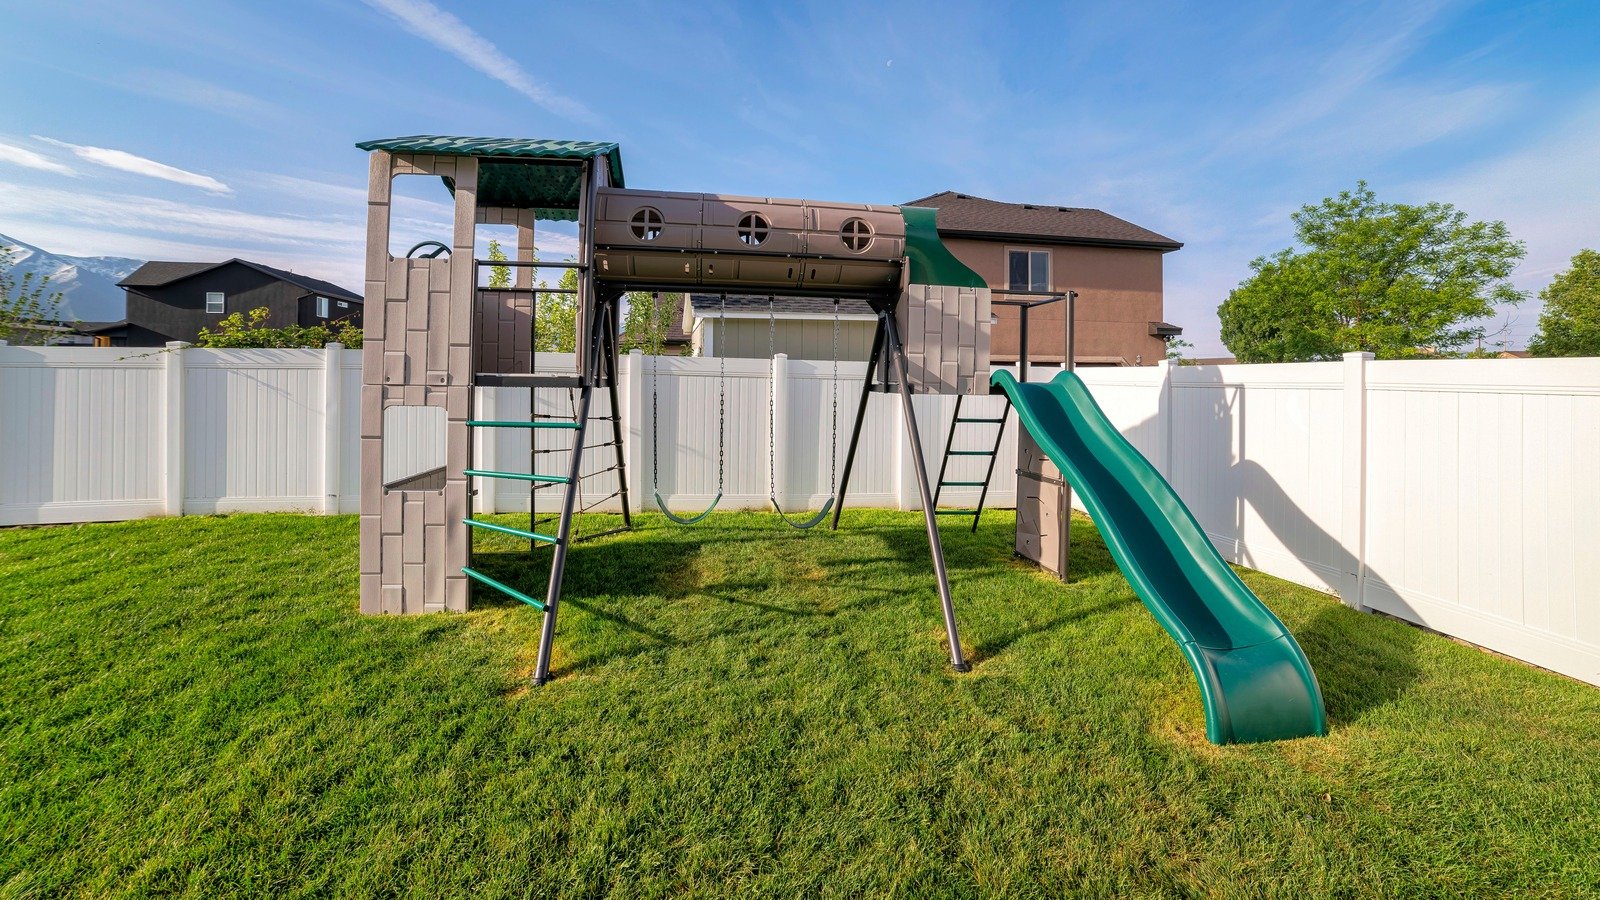 What To Look For When Purchasing A Backyard Playset